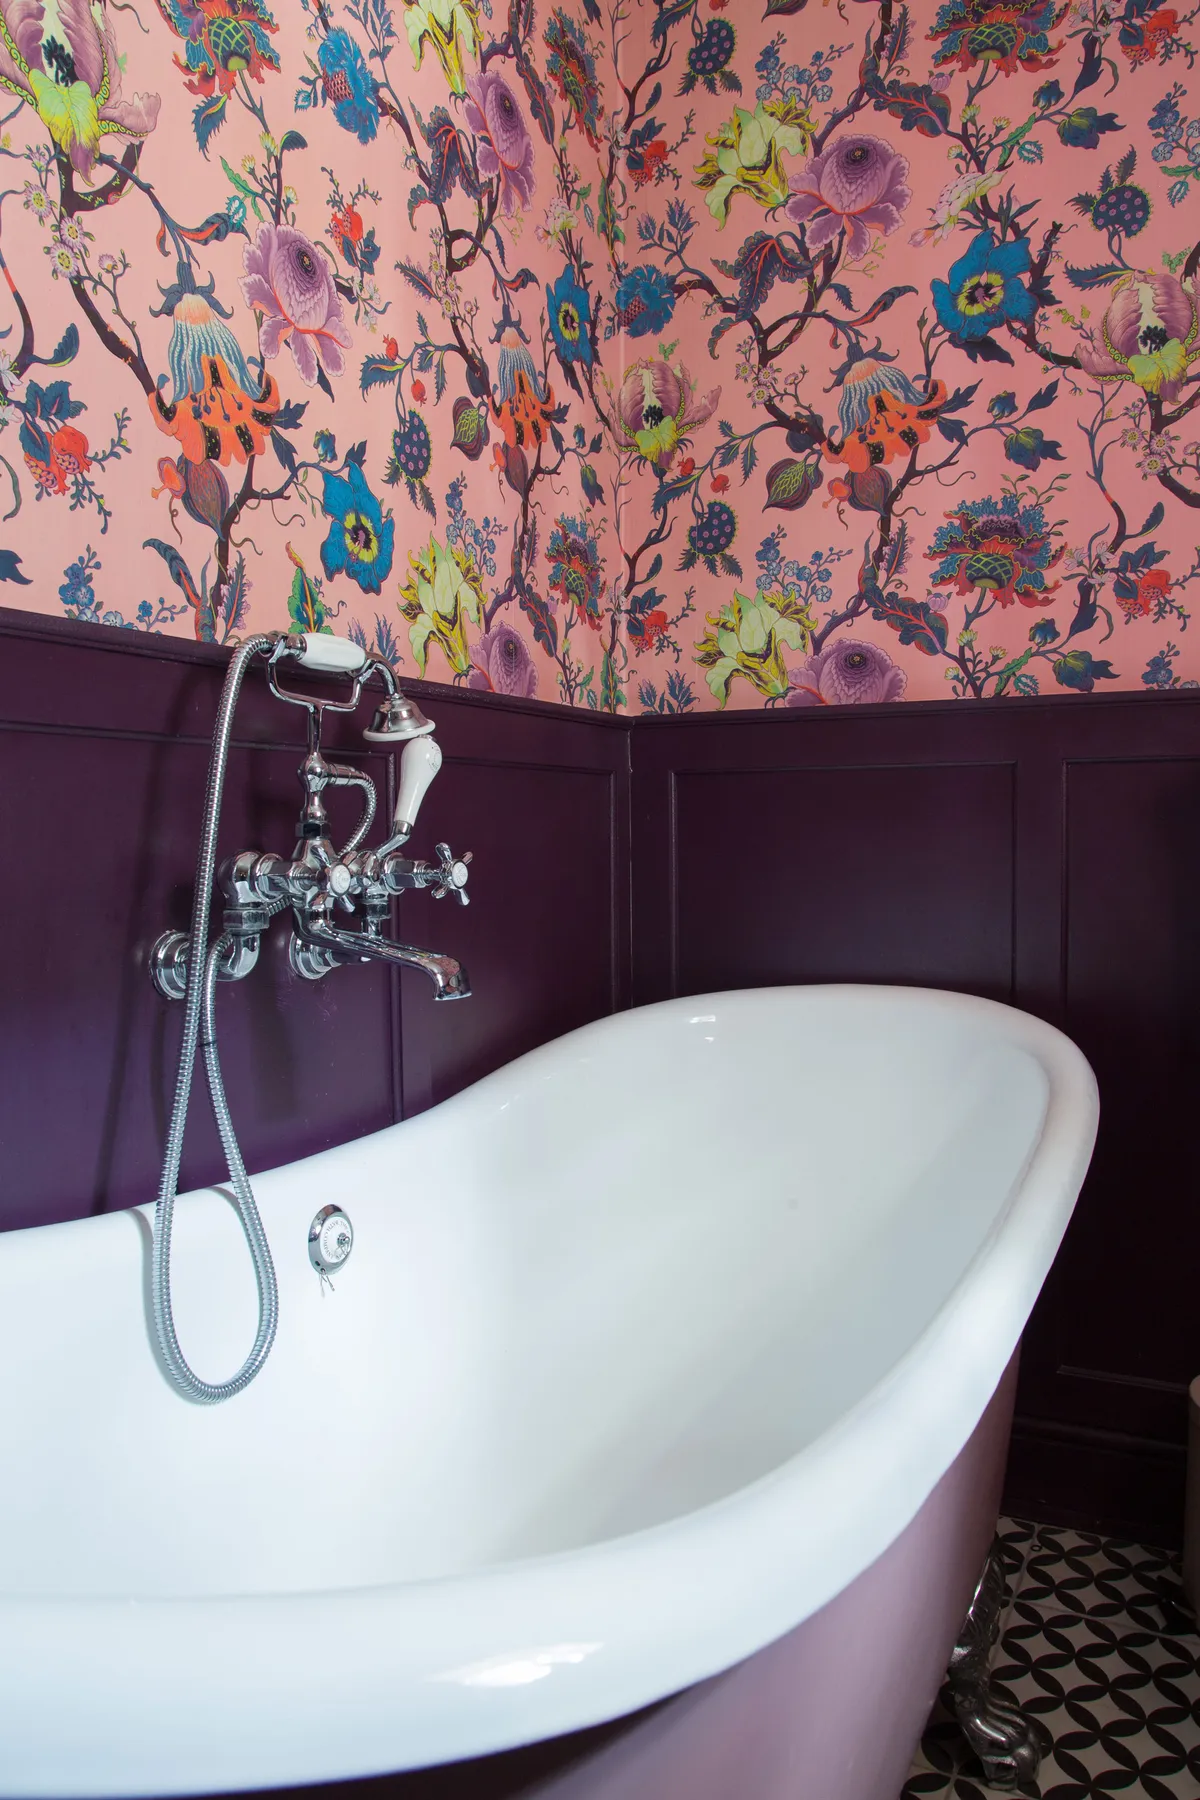 Having been clever with bargain finds elsewhere, Kate was able to spend on the bathroom. The pink bath from Cast Iron Bath Company was a luxury buy, but well worth the investment in her eyes